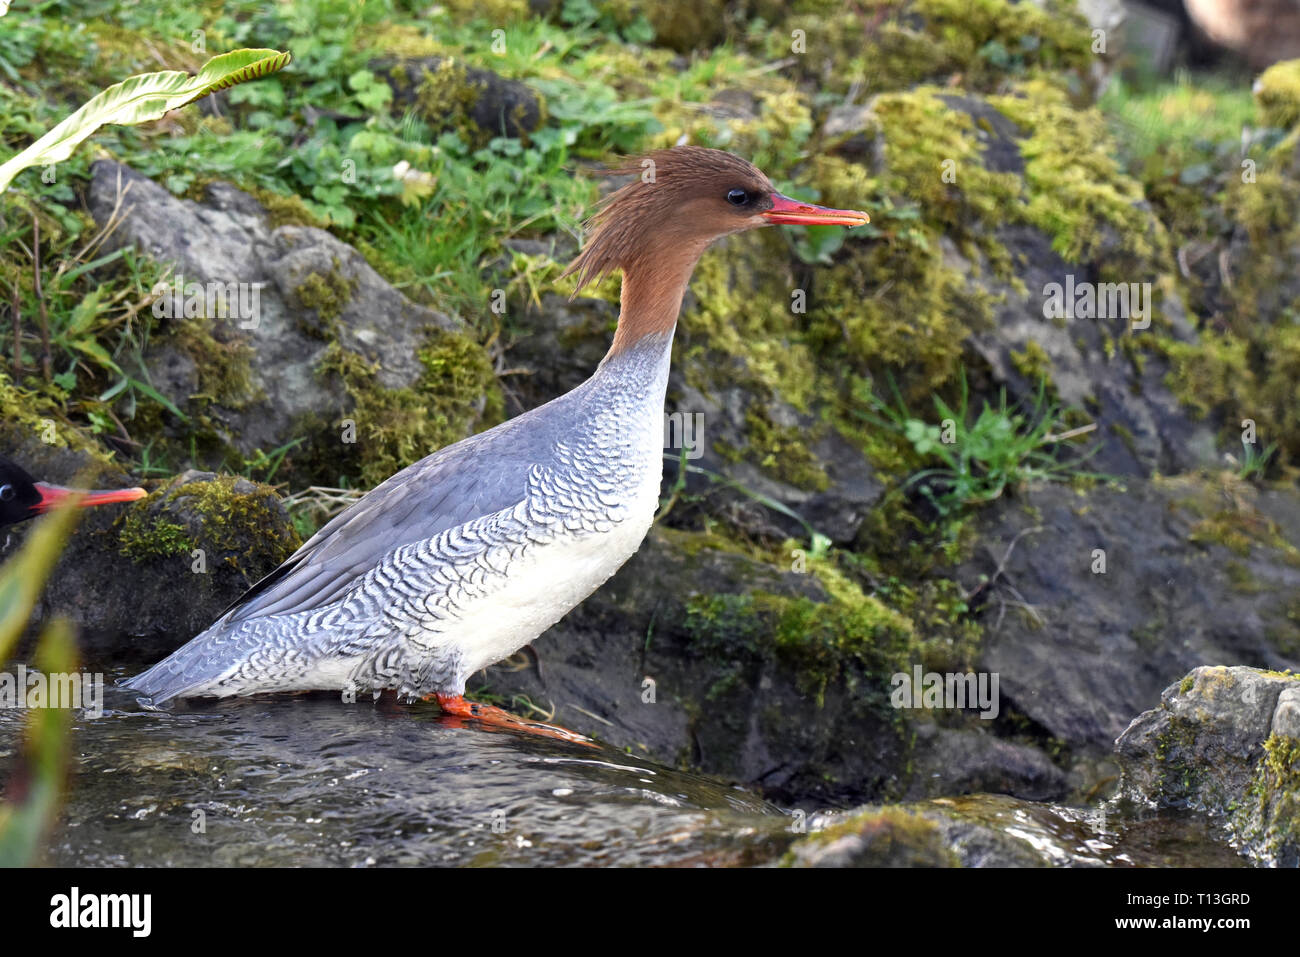 A mature female Scaly-sided Merganser (Mergus squamatus) standing in a small stream in Southern England Stock Photo